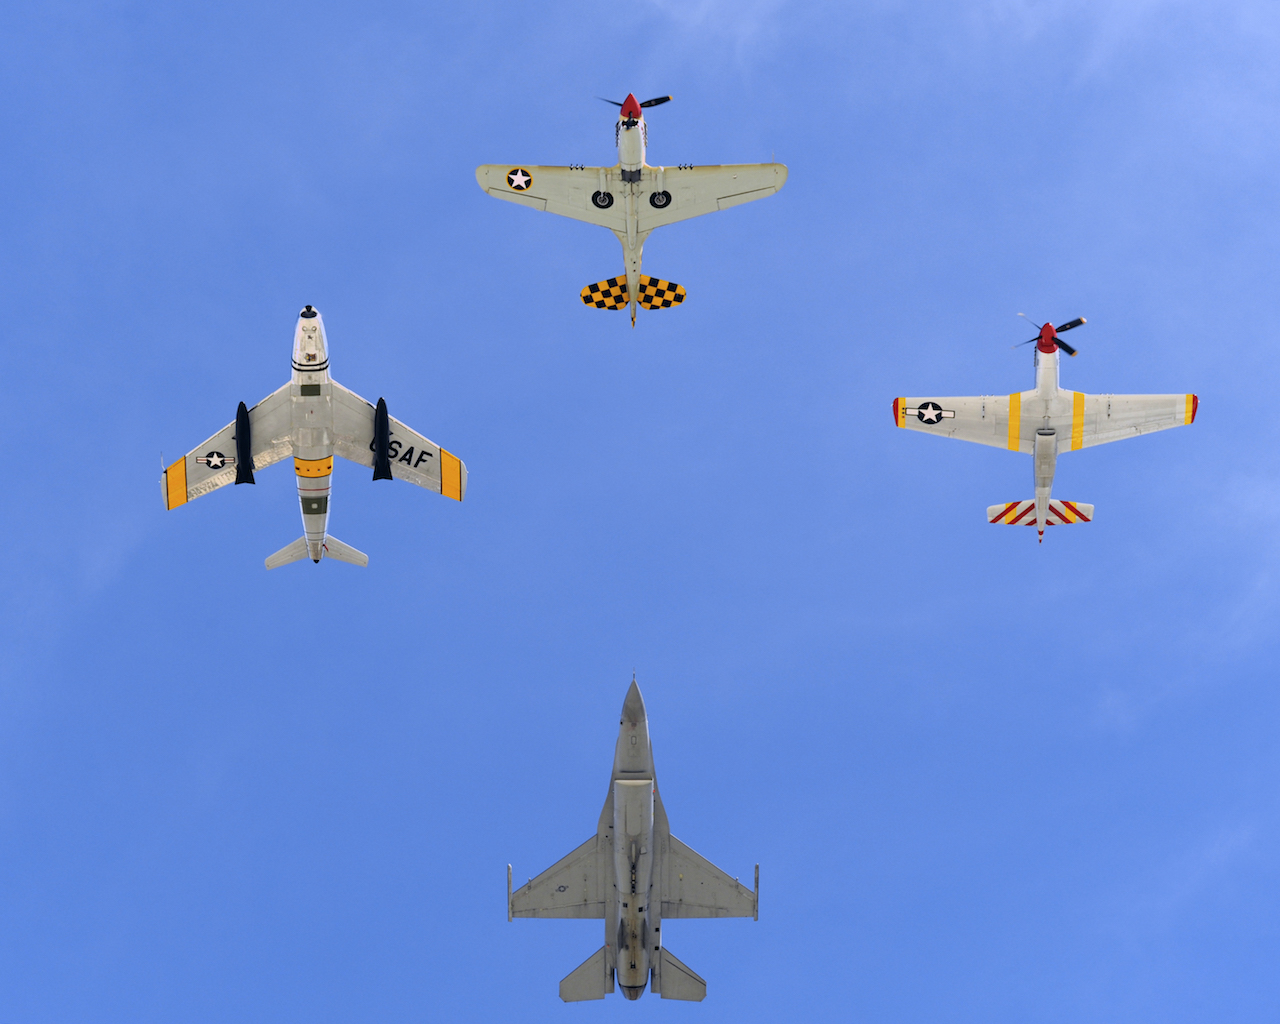 A U.S. Air Force F-16 Fighting Falcon (bottom) joins in formation with a P-40 Warhawk (top), P-51 Mustang (right), and a F-86 Sabre Jet (left) over Davis-Monthan Air Force Base, Ariz., during Heritage Flight Training Course March 2, 2014. During the course aircrews practiced ground and flight training to allow civilian pilots of historic military aircraft and current Air Force fighter pilots to safely fly in formations together, in preparation for the upcoming Open House. (U.S. Air Force photo by Airman 1st Class Chris Massey/ Released) 